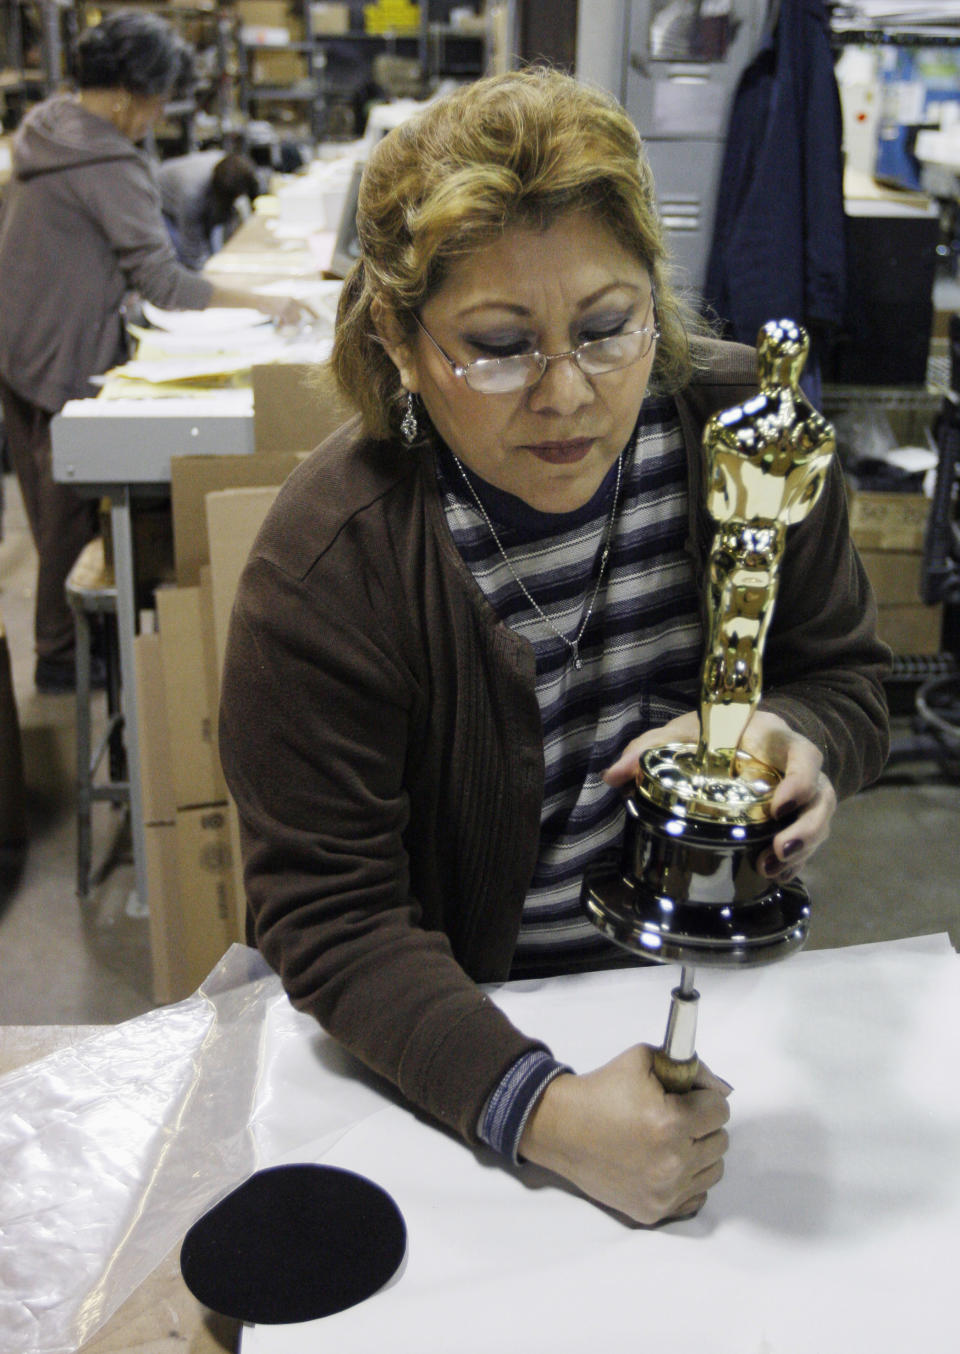 FILE - In this Jan. 26, 2009 file photo, Bertha Fuentes assembles the statue and the base of an Oscar statuette at R.S. Owens & Co., in Chicago. The company said it will be laying off 95 workers on Dec. 17, 2012. The cuts come a month after R,.S. Owens announced it was being purchased on Dec. 17 by St. Regis Crystal Inc. of Indianapolis. The company has about 250 employees. A news release on the sale said the company will continue to make Oscar and Emmy statues in Chicago. They have been making the Oscar statues for about 30 years. (AP Photo/M. Spencer Green, File)